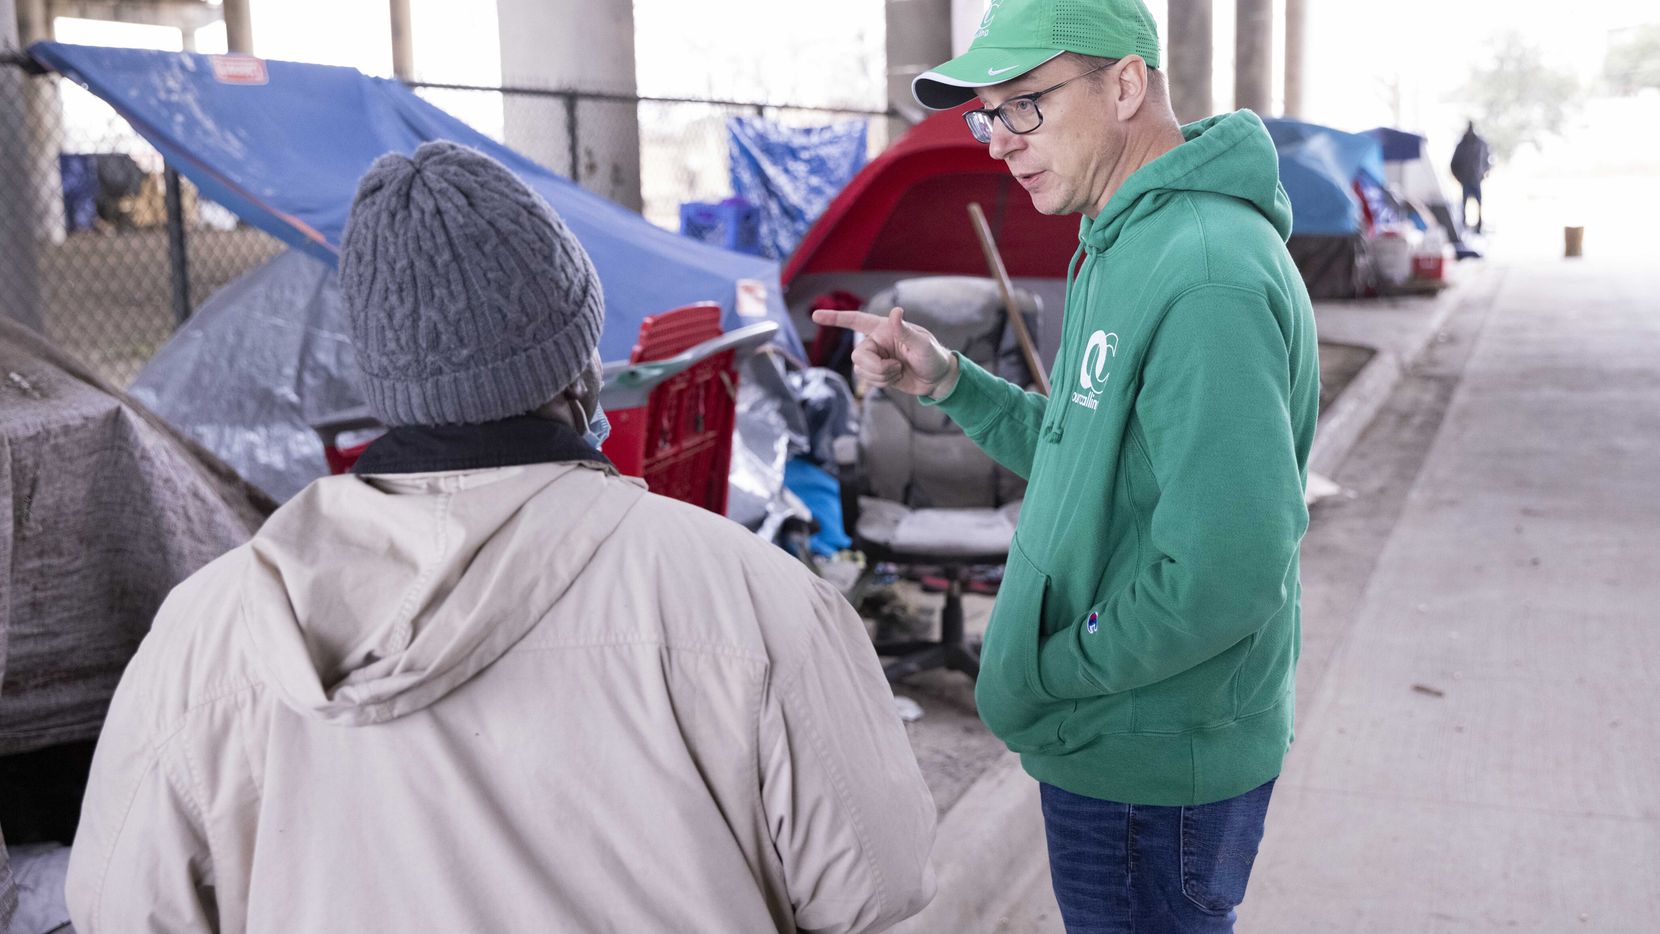 OurCalling Help Homeless Find Shelter Amidst Winter Storm